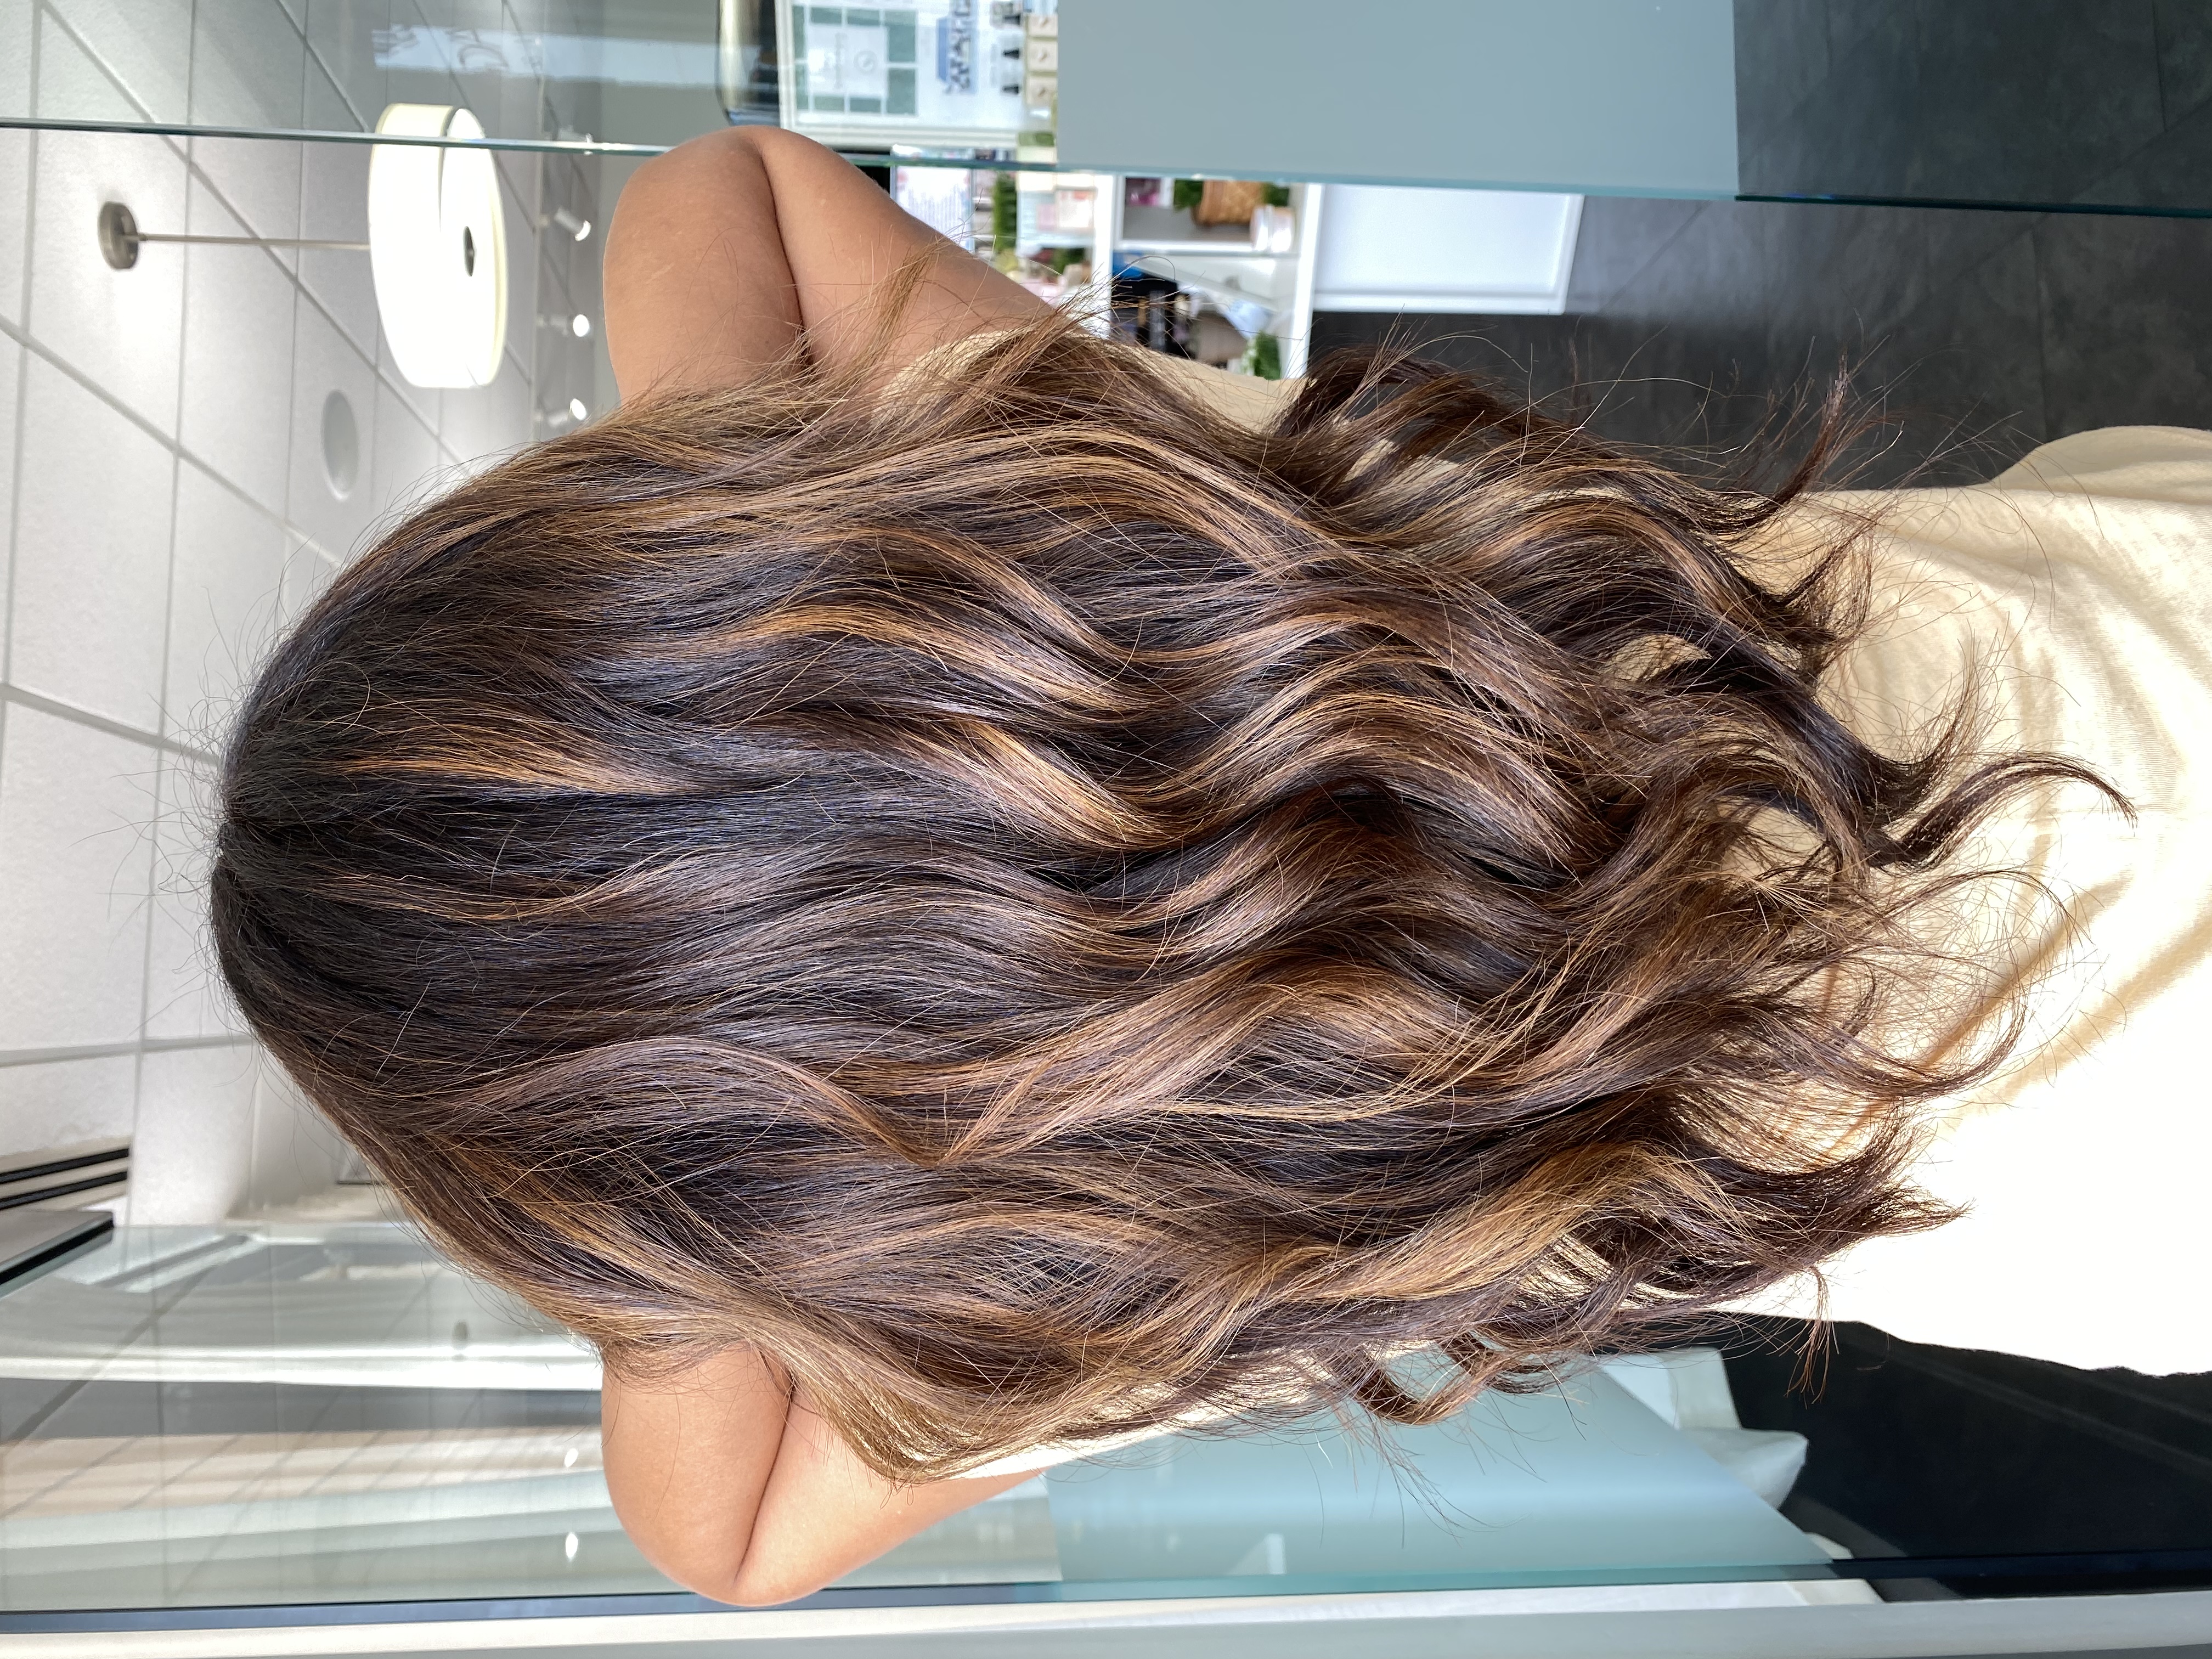 Get The Look: Caramel Balayage - Bangstyle - House of Hair Inspiration